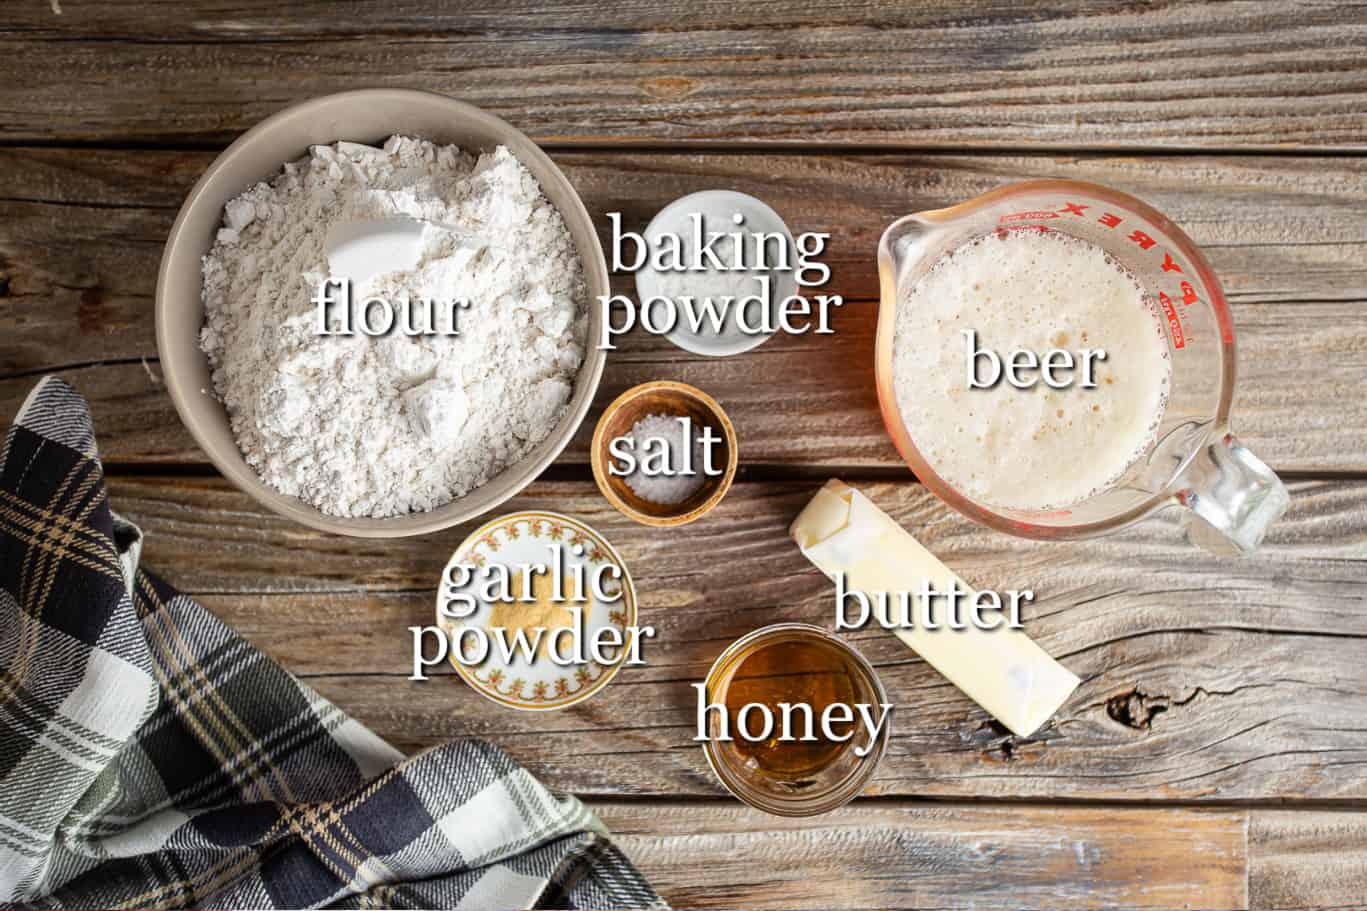 Ingredients for making beer bread, with text labels.